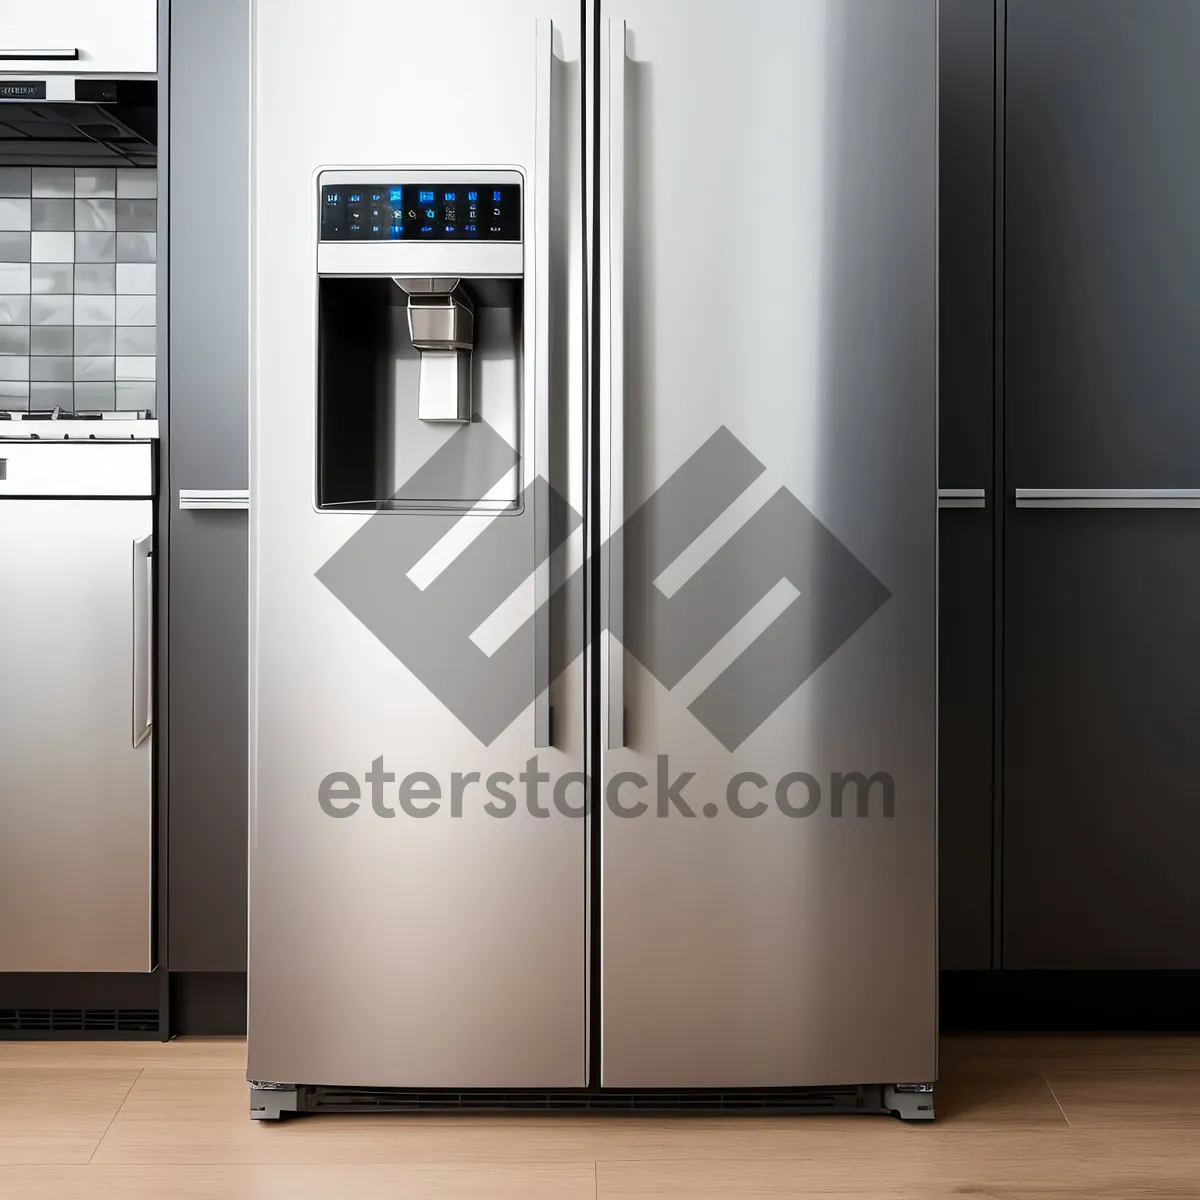 Picture of White Refrigerator with Cooling System - Home Appliance